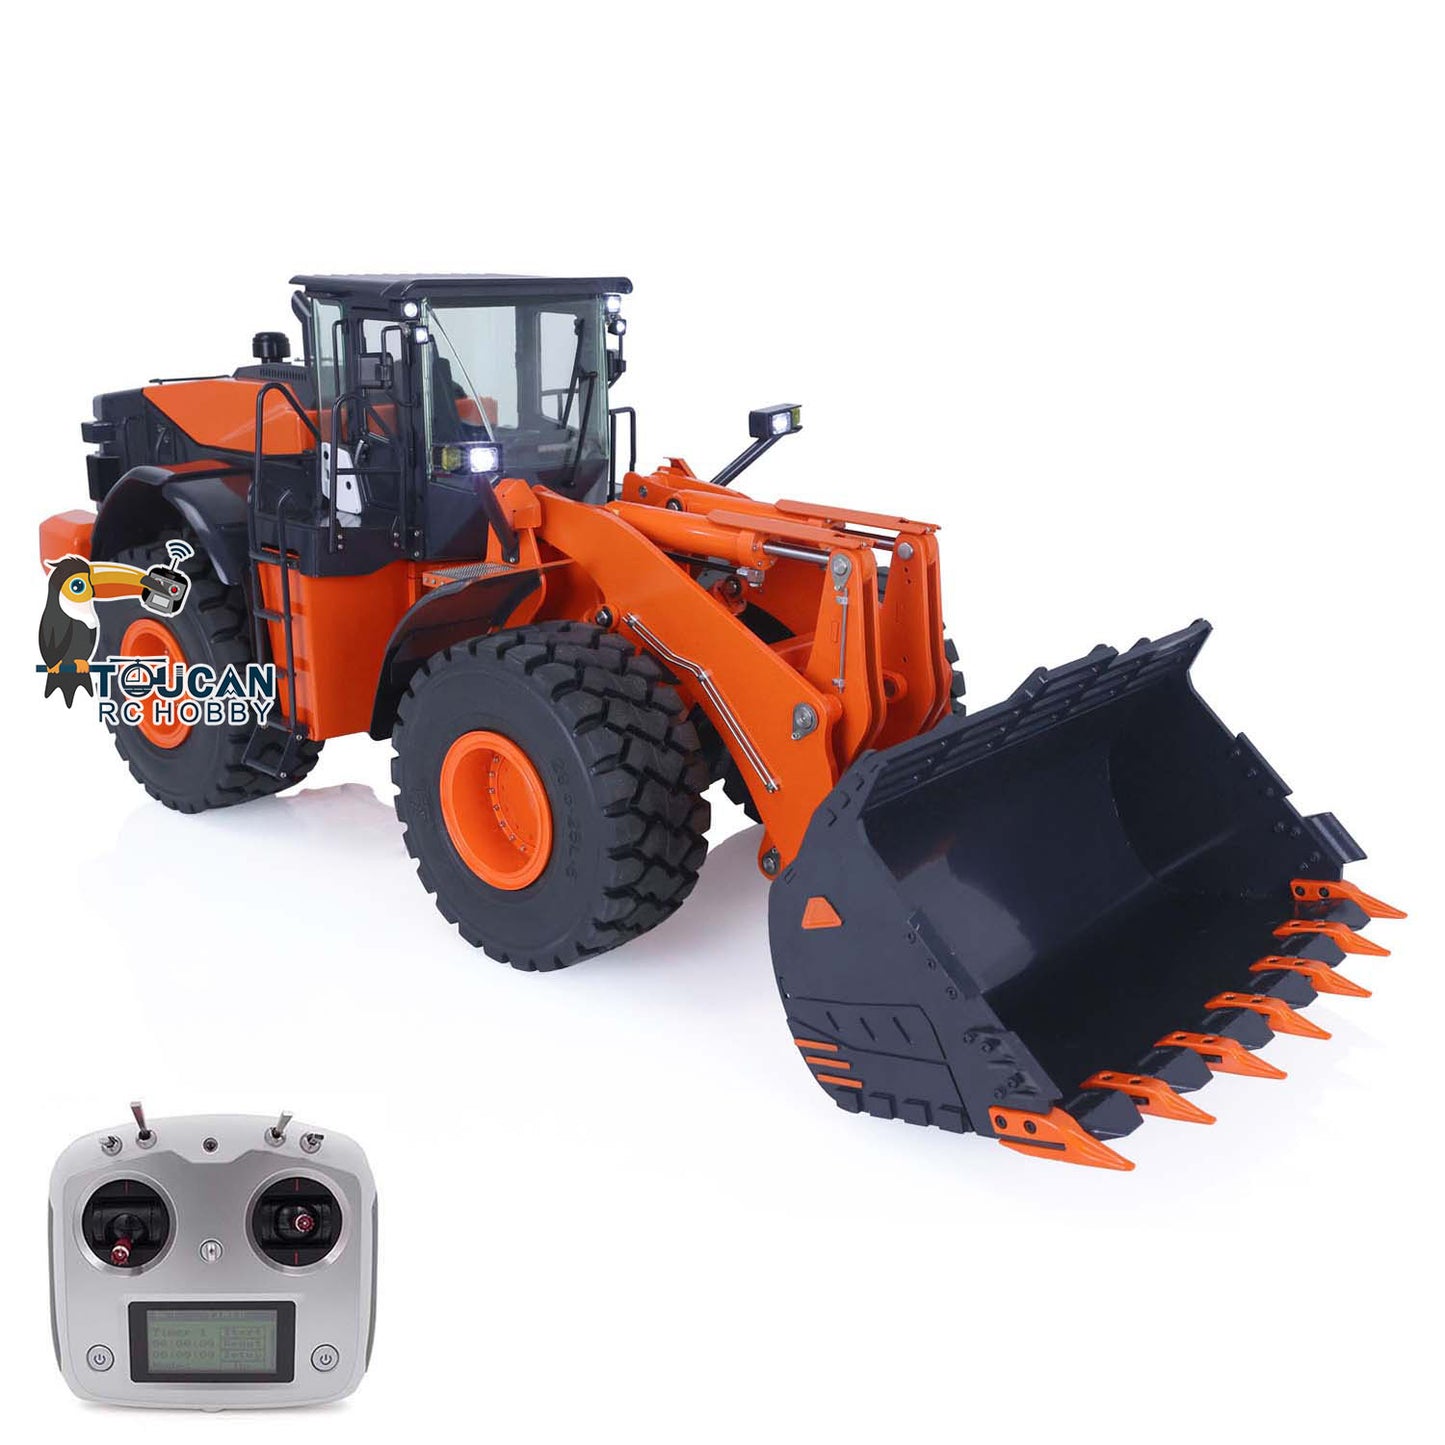 IN STOCK Metal JDM-198 1/14 RC Hydraulic Loader ZW370 Heavy Construction Vehicles Models USB Cable FS I6S Controller and Receiver